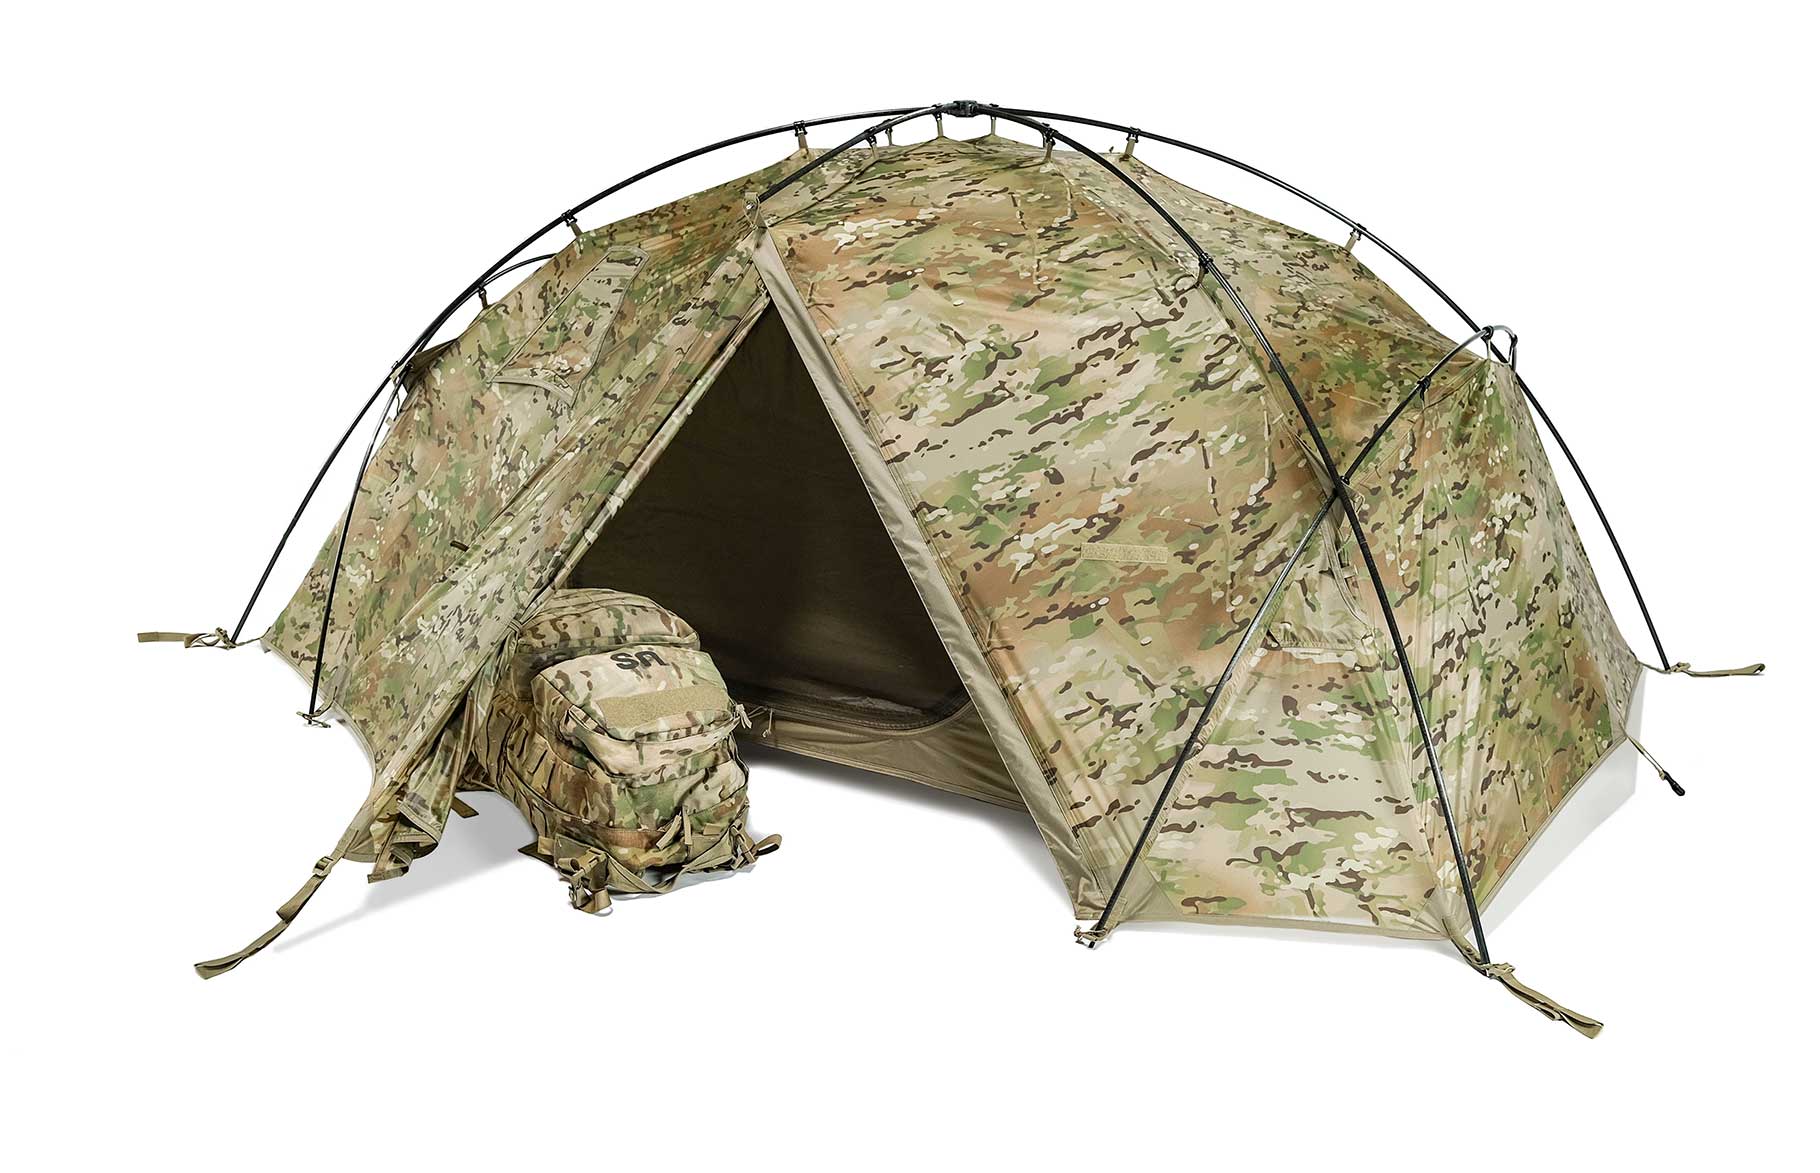 CataMount 2 Cold Weather Tent